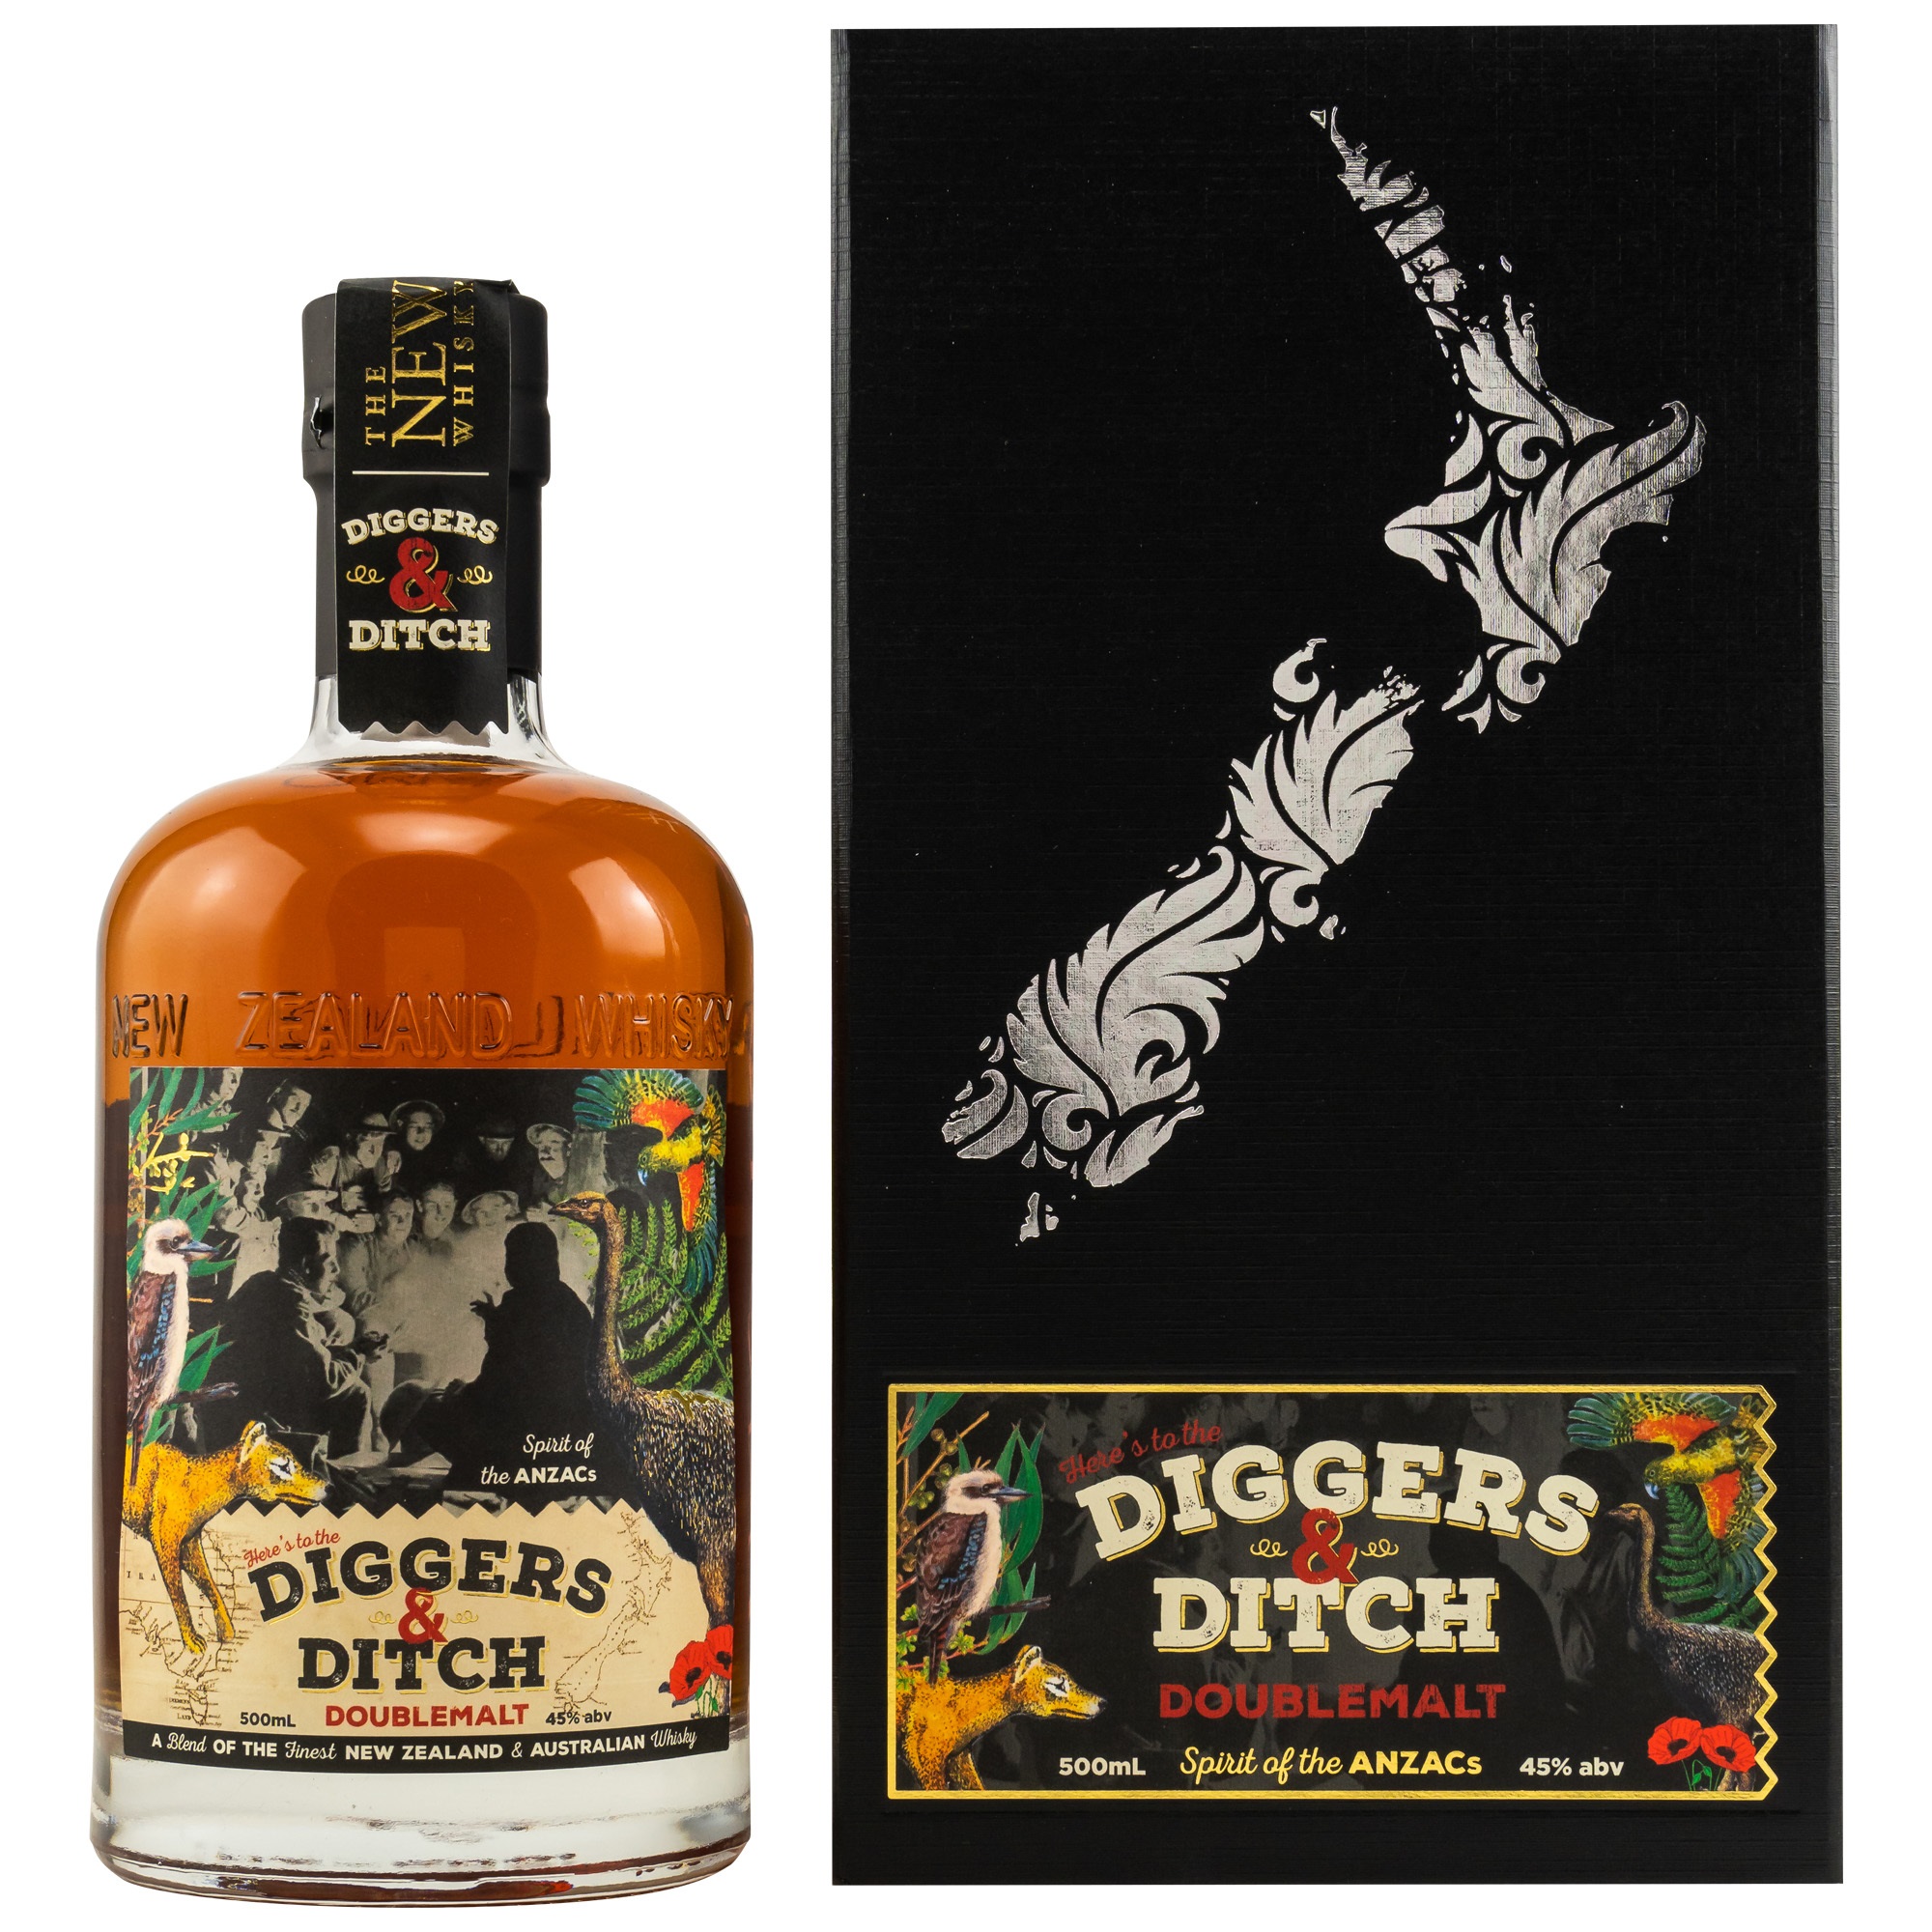 The New Zealand Diggers & Ditch (Neuseeland) 45.0% 0,5l